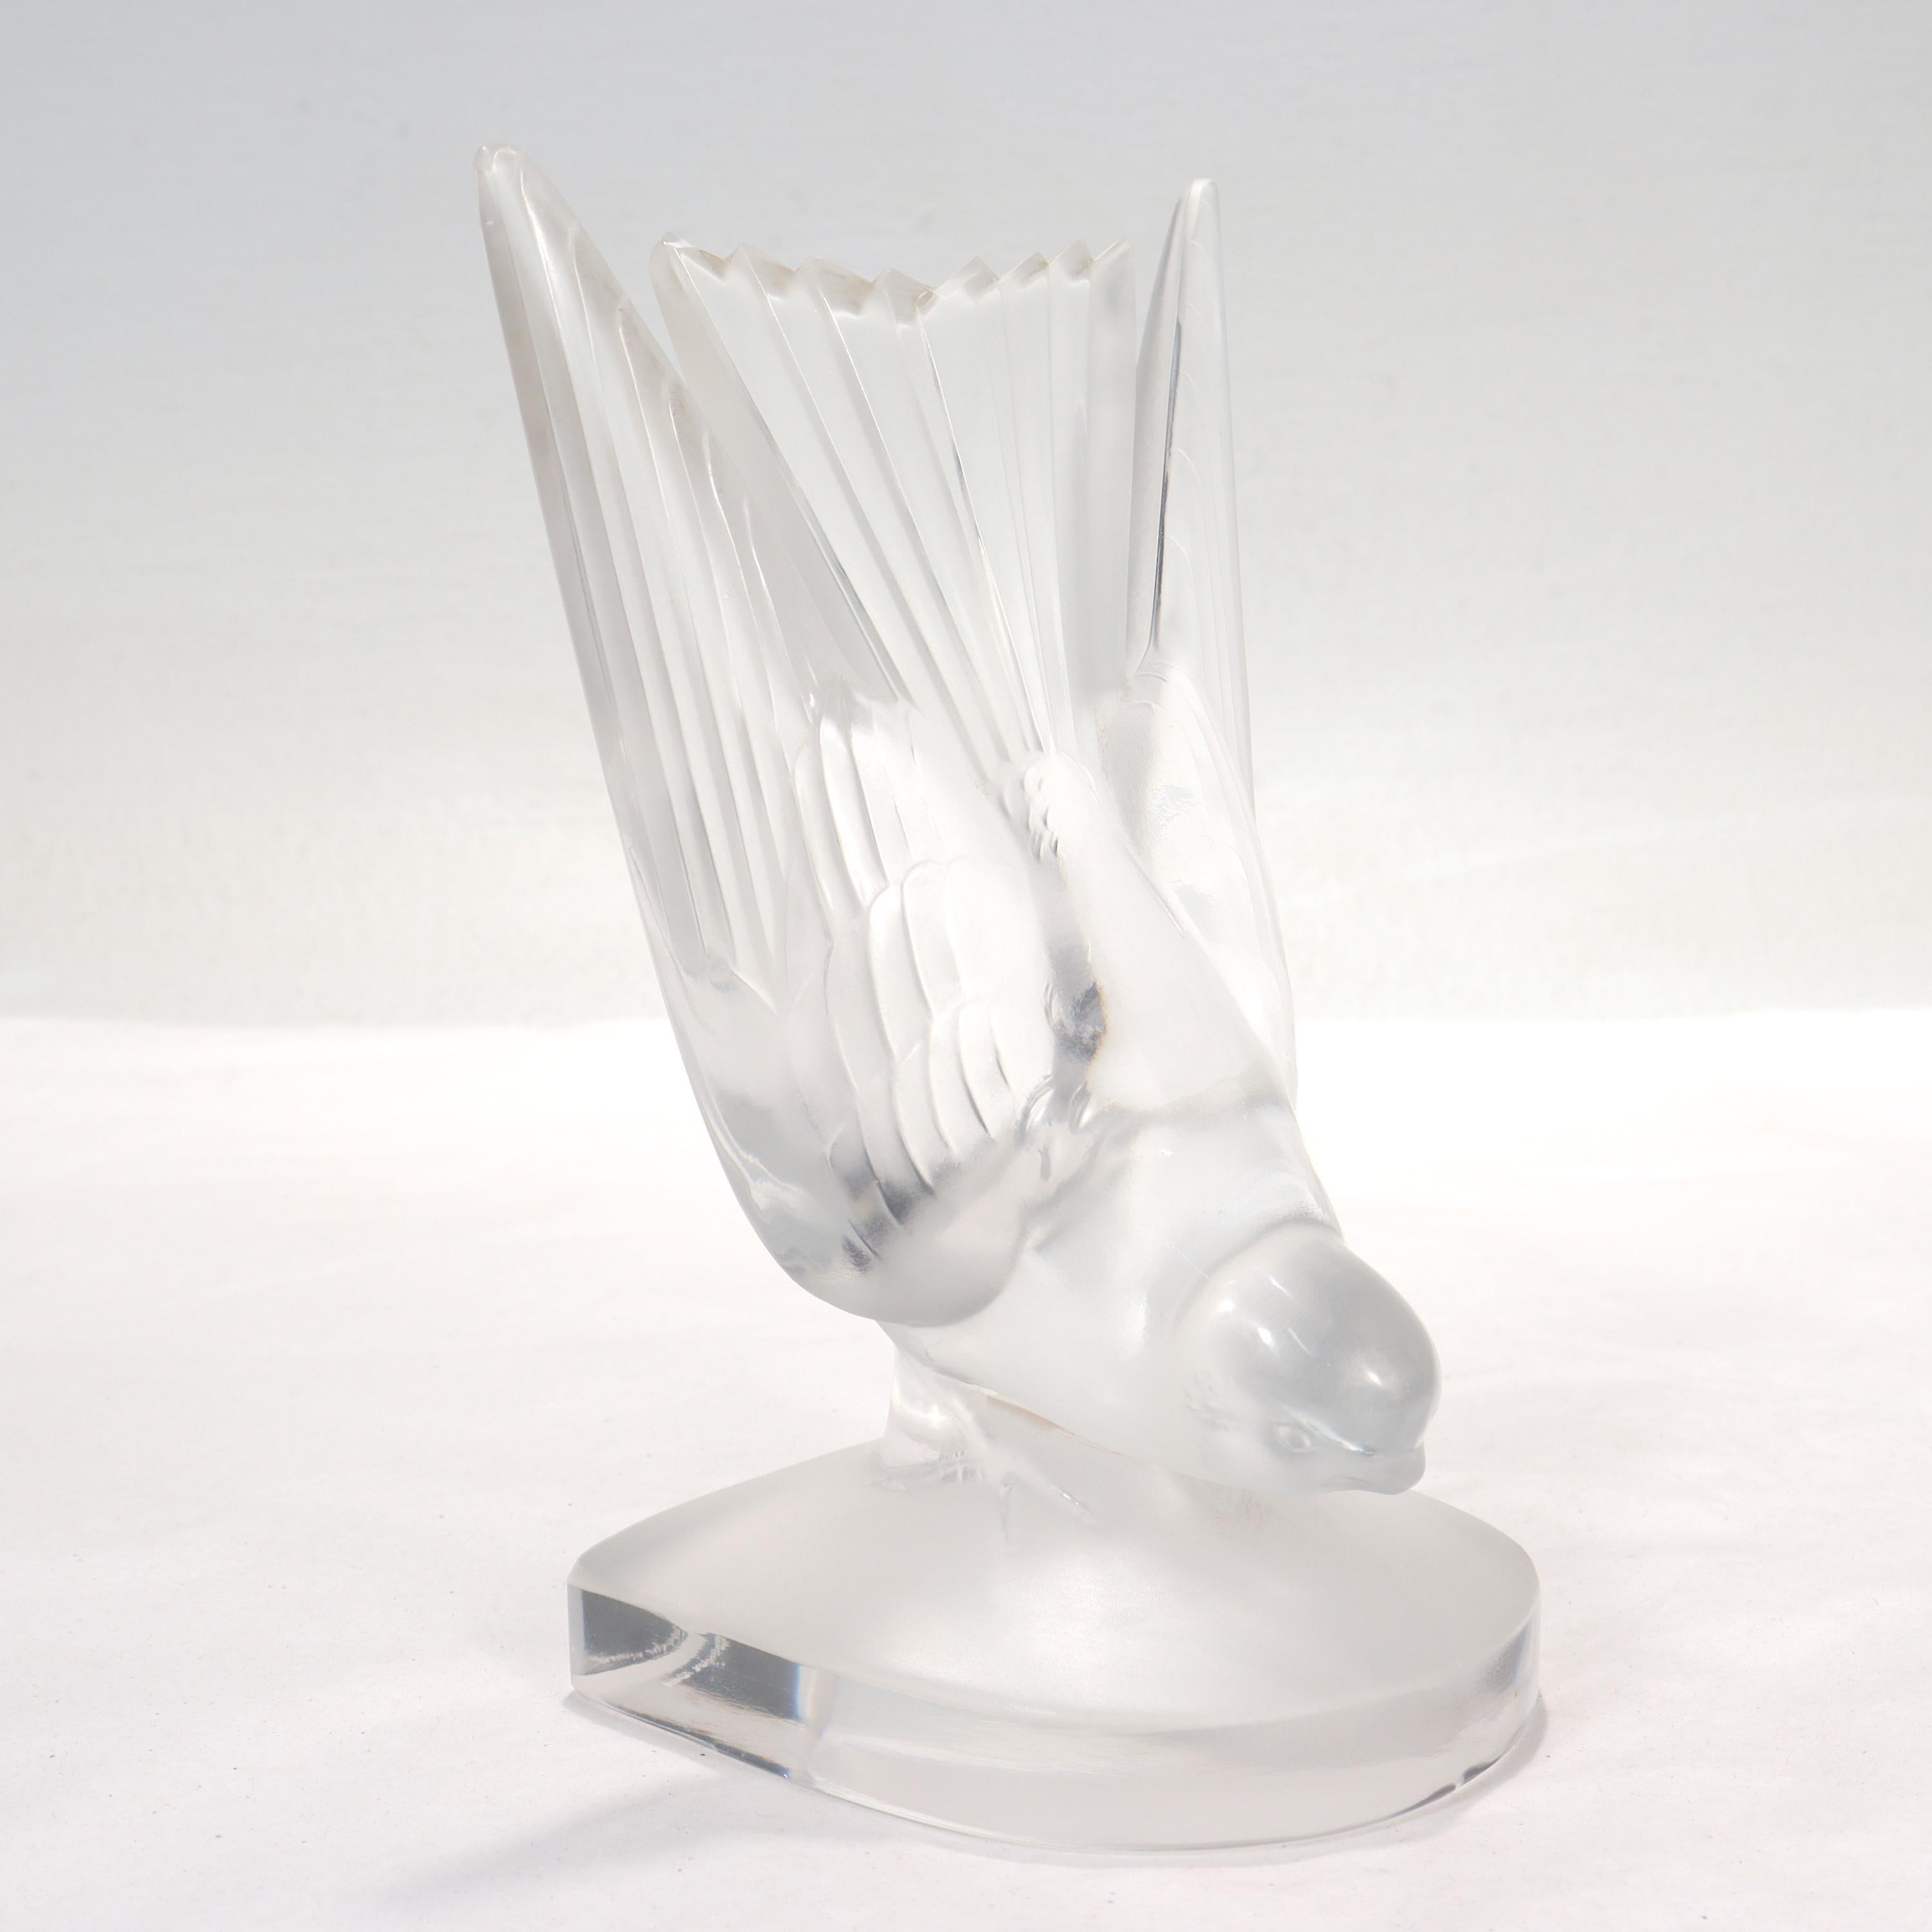 20th Century Lalique French Art Glass Bird (Swallow) Bookend or Paperweight For Sale